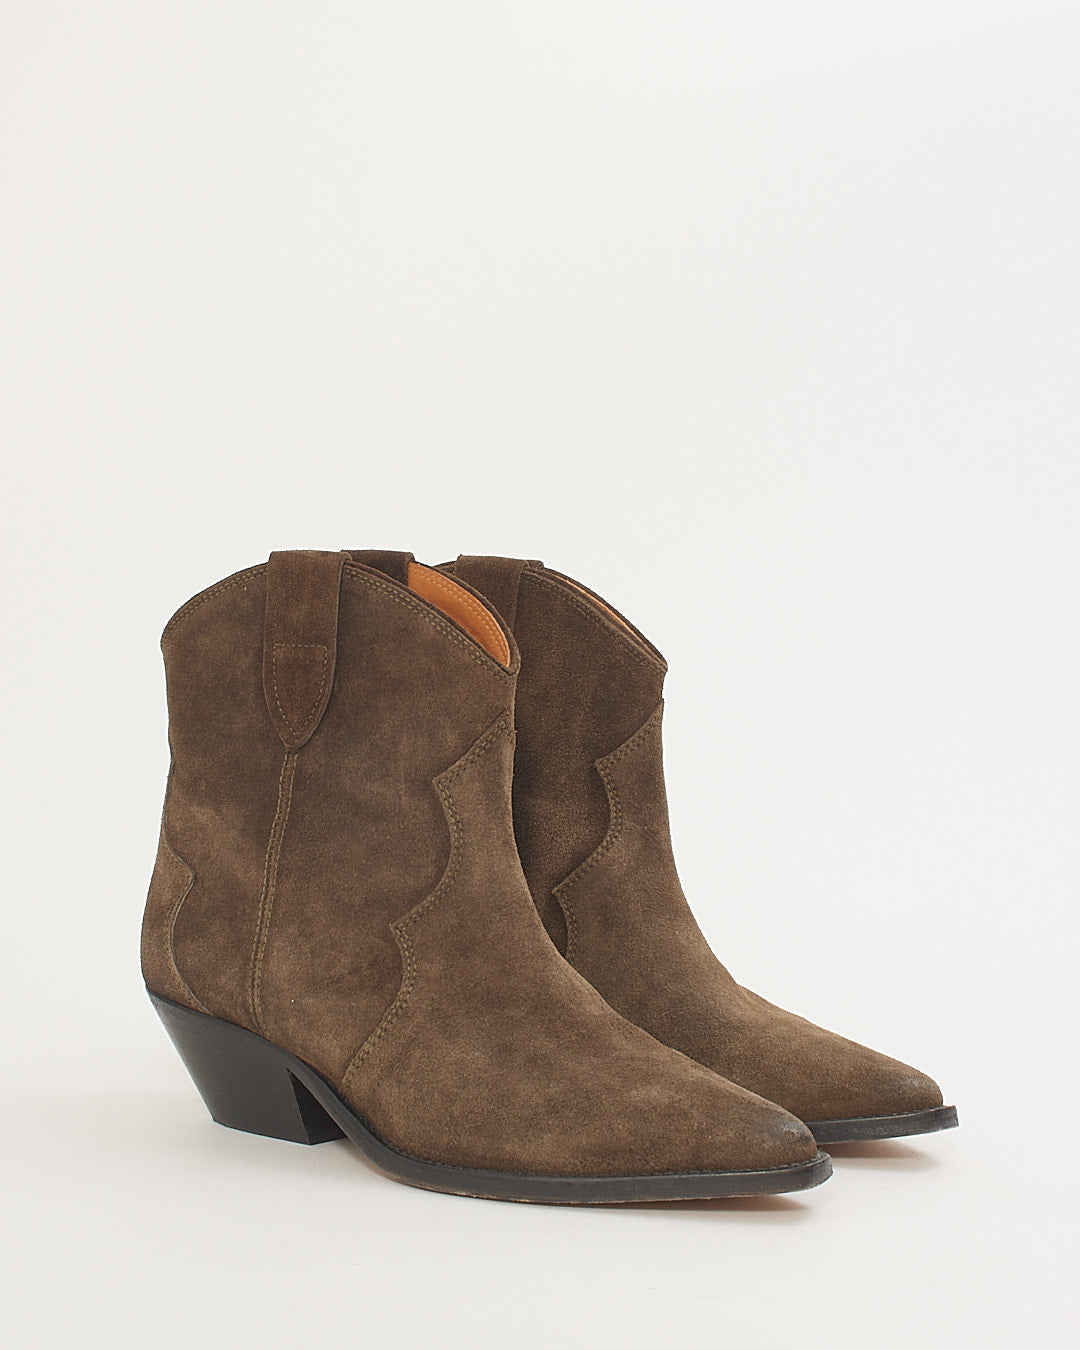 Isabel Marant Beige Taupe Suede Dewina Boots - 39